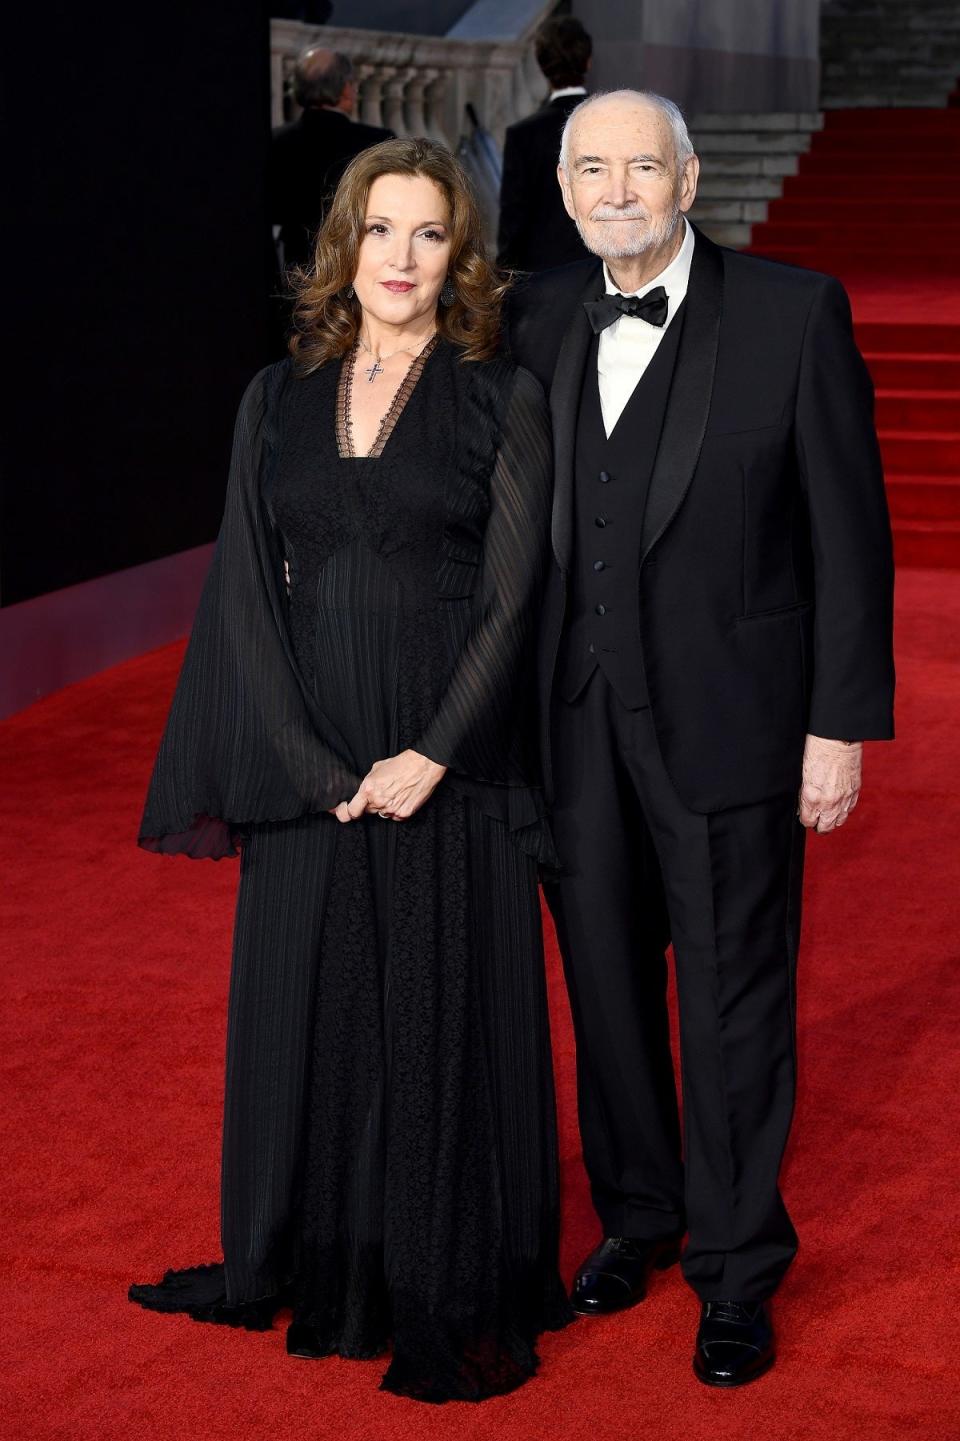 James Bond producers Barbara Broccoli and Michael Wilson collected their CBEs from the Duke of Cambridge at Buckingham Palace (Eon Productions/PA) (PA Media)